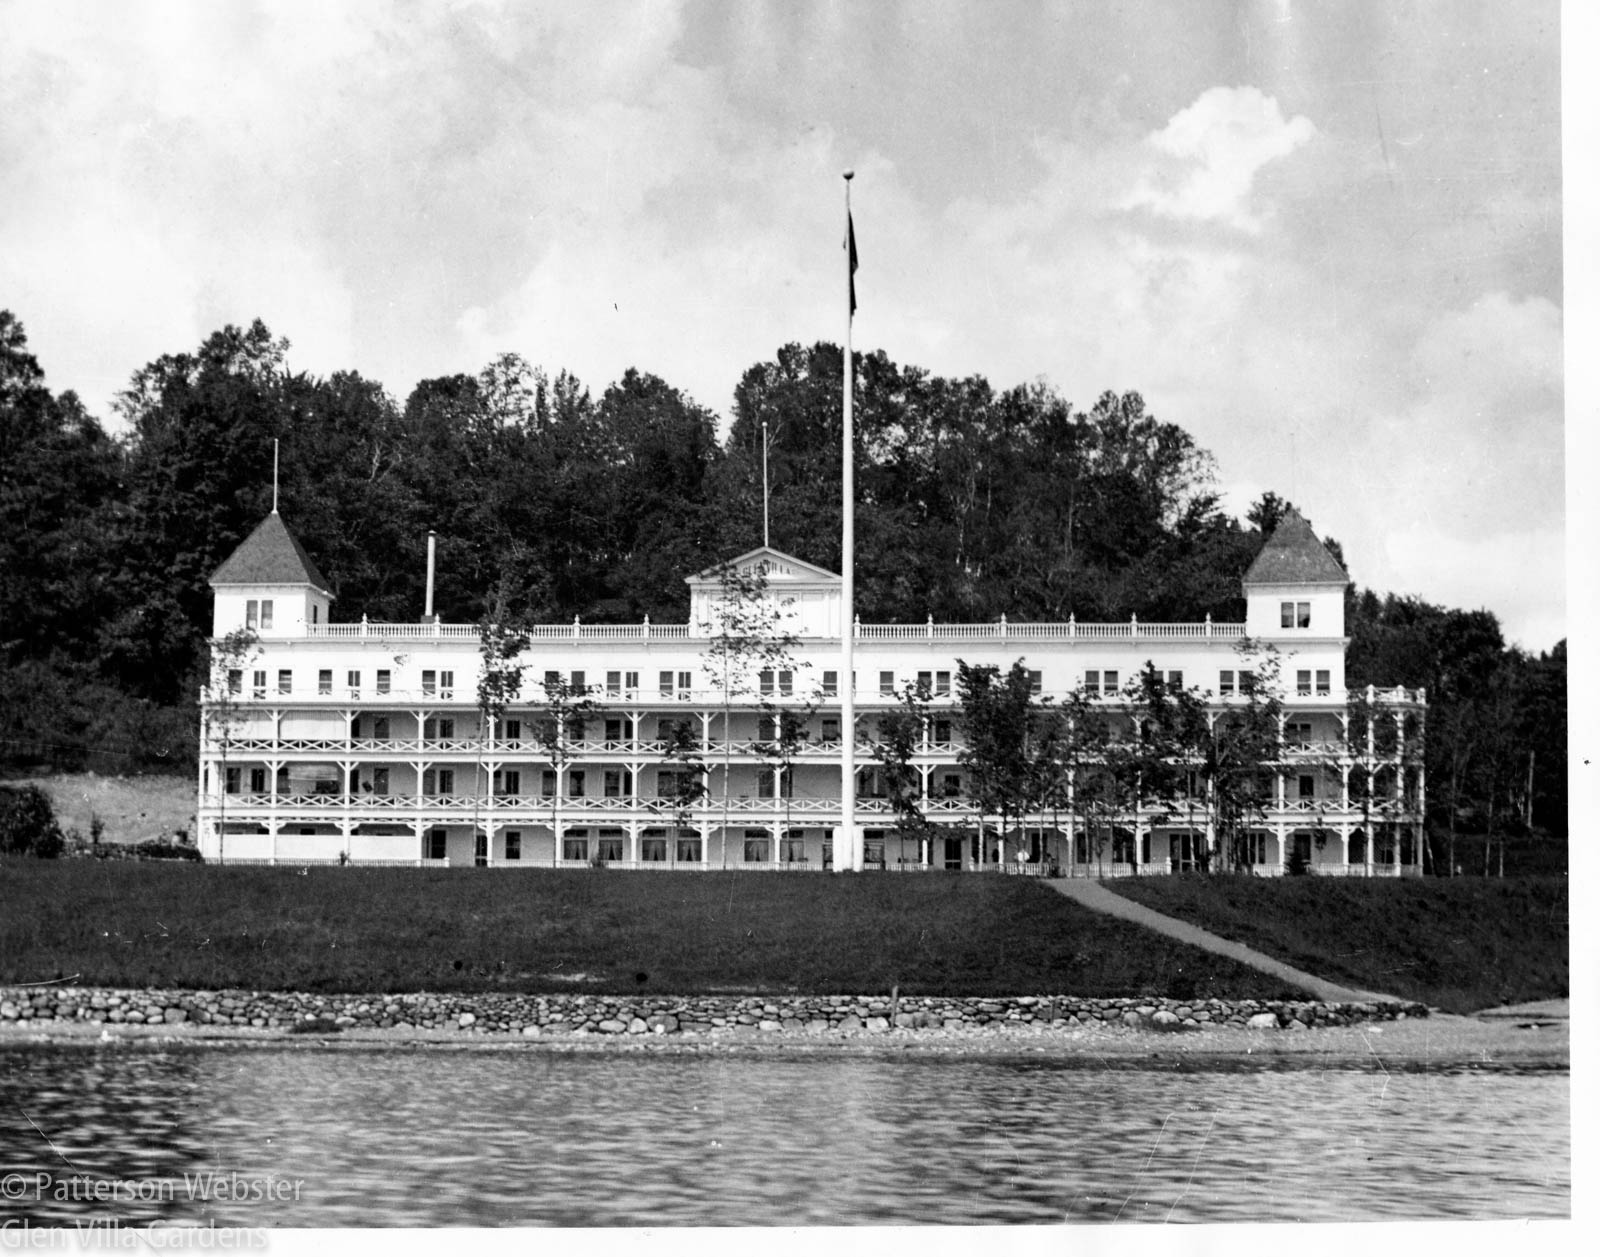 This black and white photo shows the hotel as it was in its heyday.